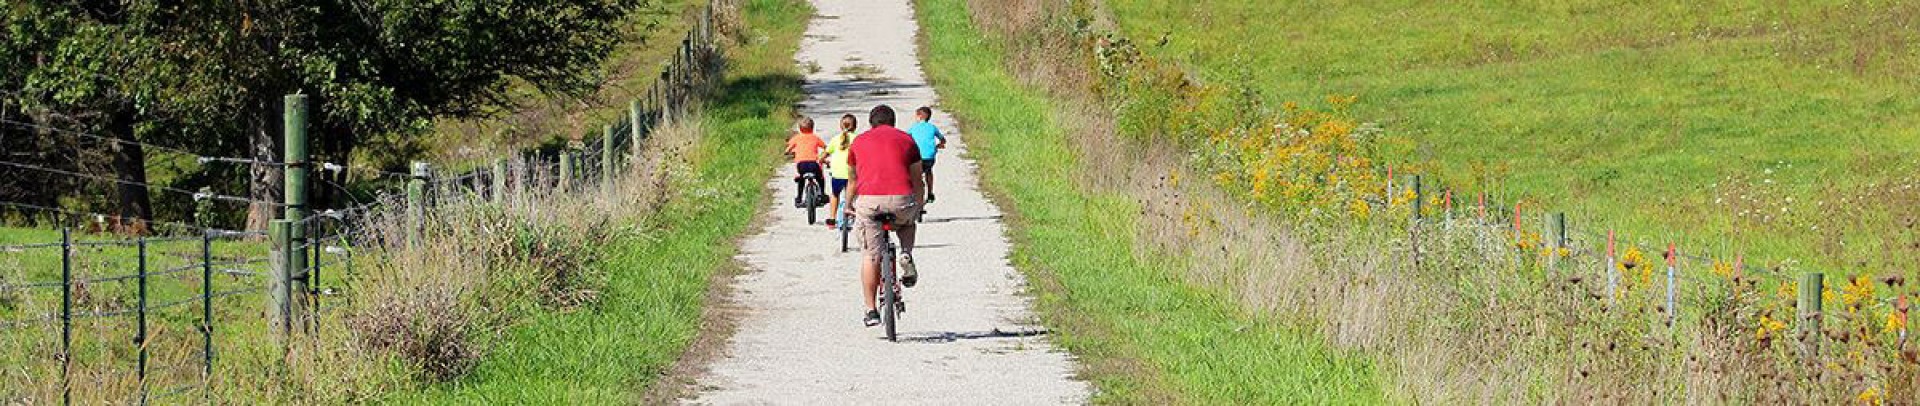 Cyclists on the Flint River Trail in Des Moines County, Iowa.